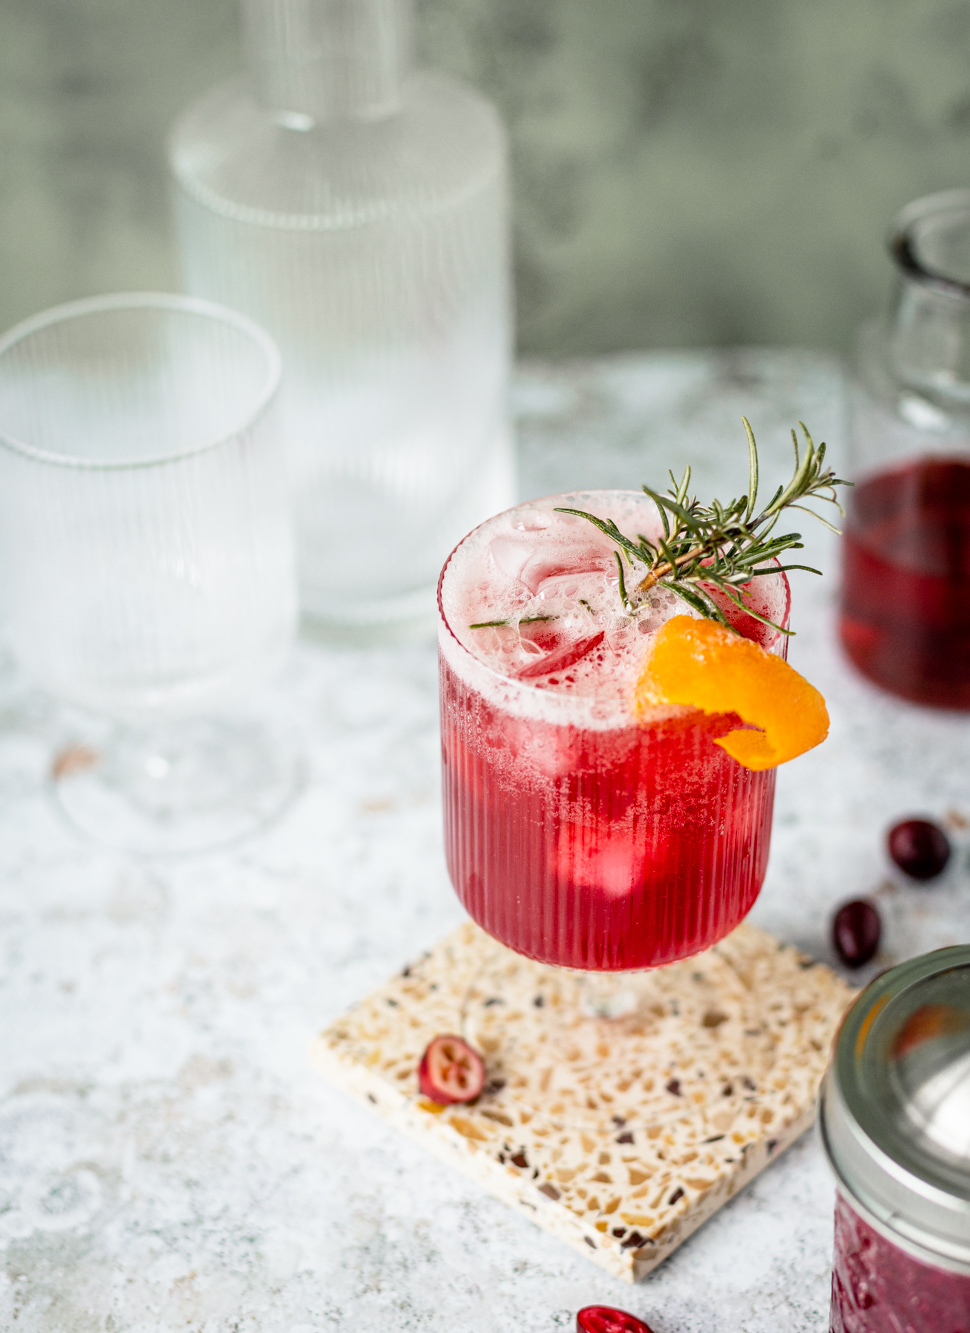 Cranberry Ginger Ale